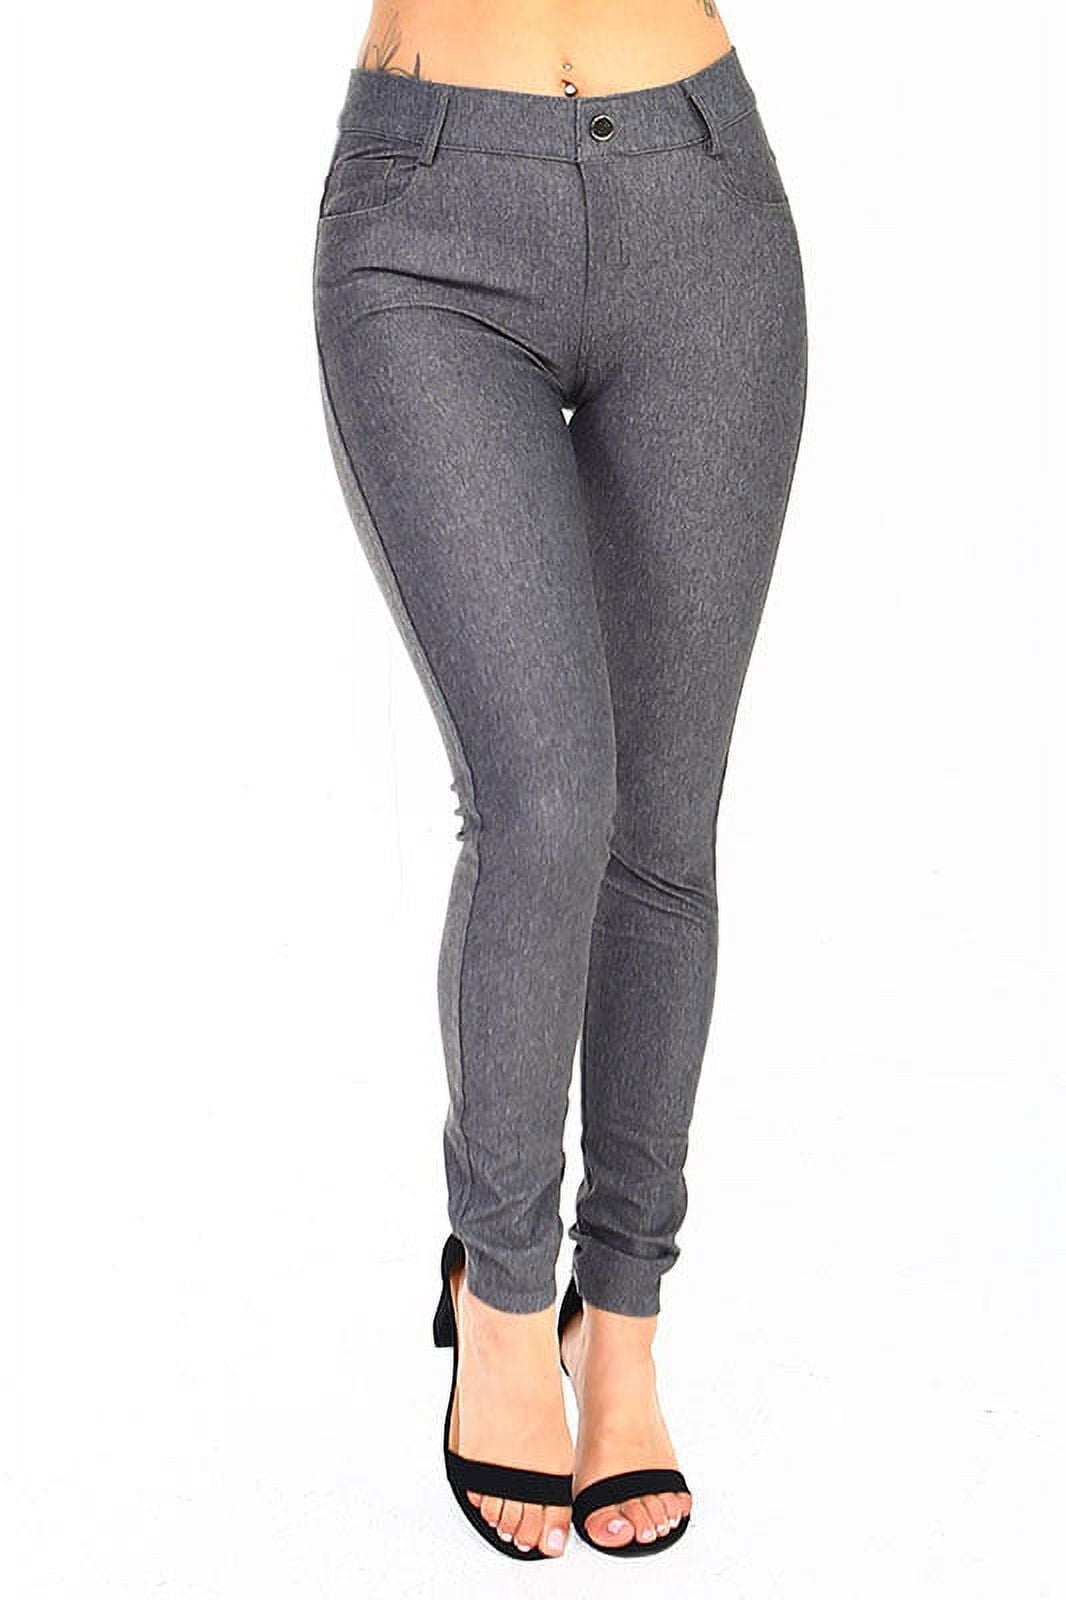 Classic Women's Cotton Blend Waist Jeggings Stretchy Skinny Pants